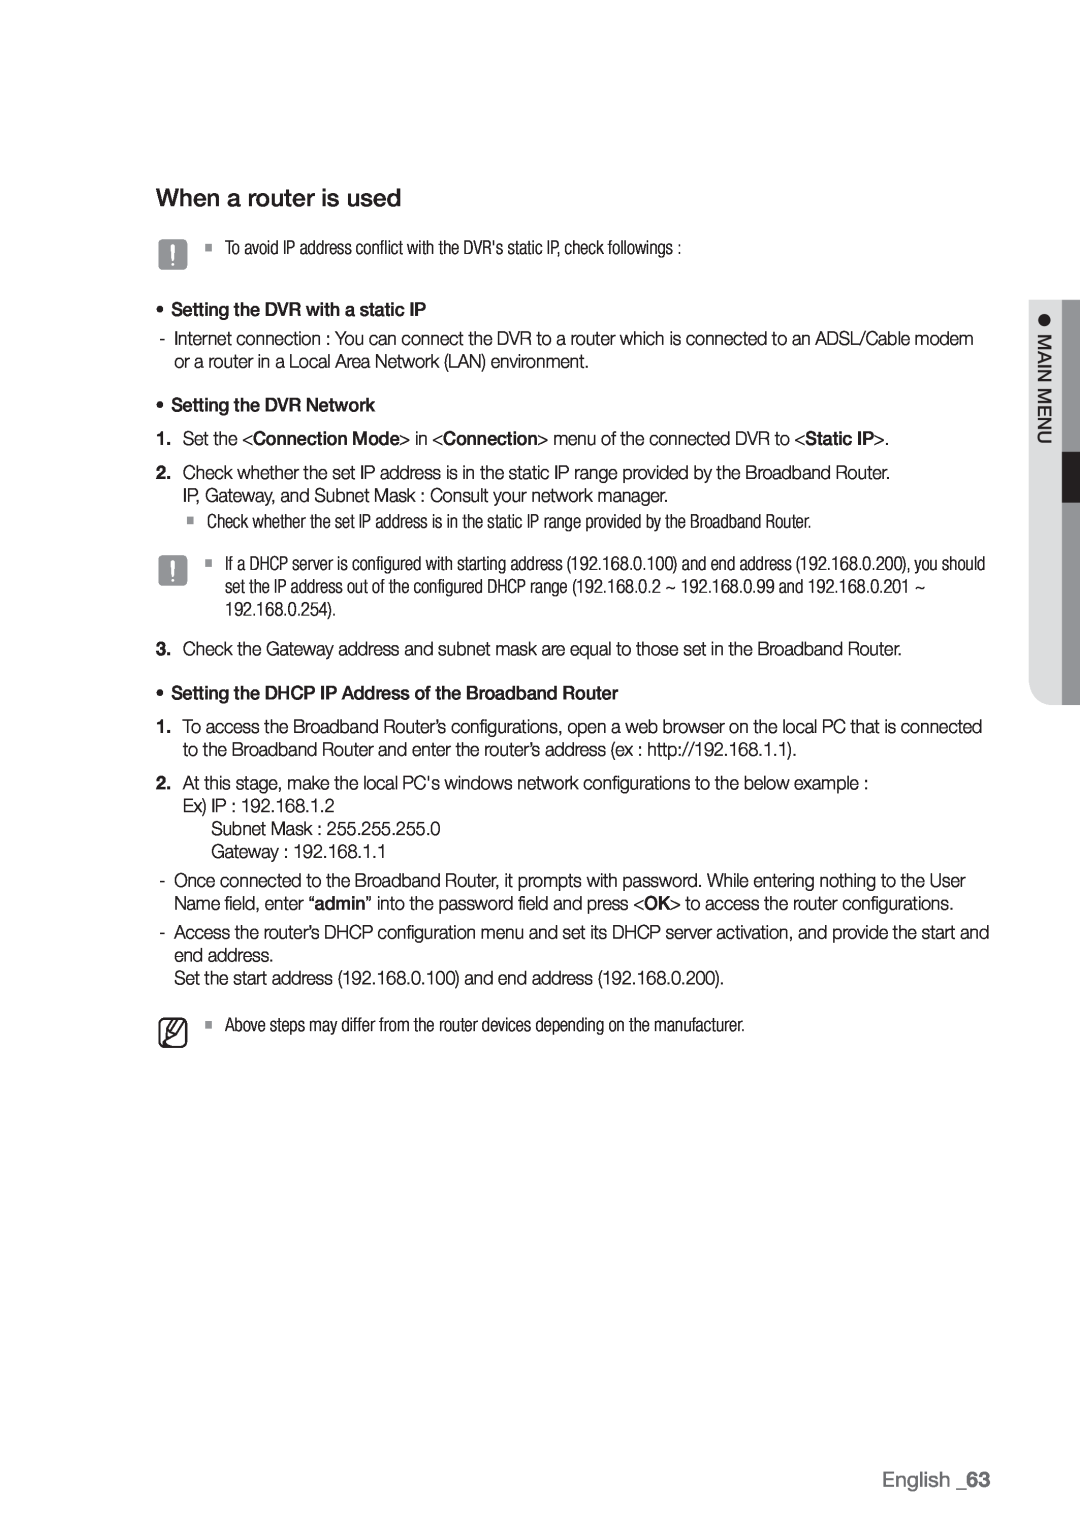 Samsung SDR3100 user manual When a router is used, English _63 